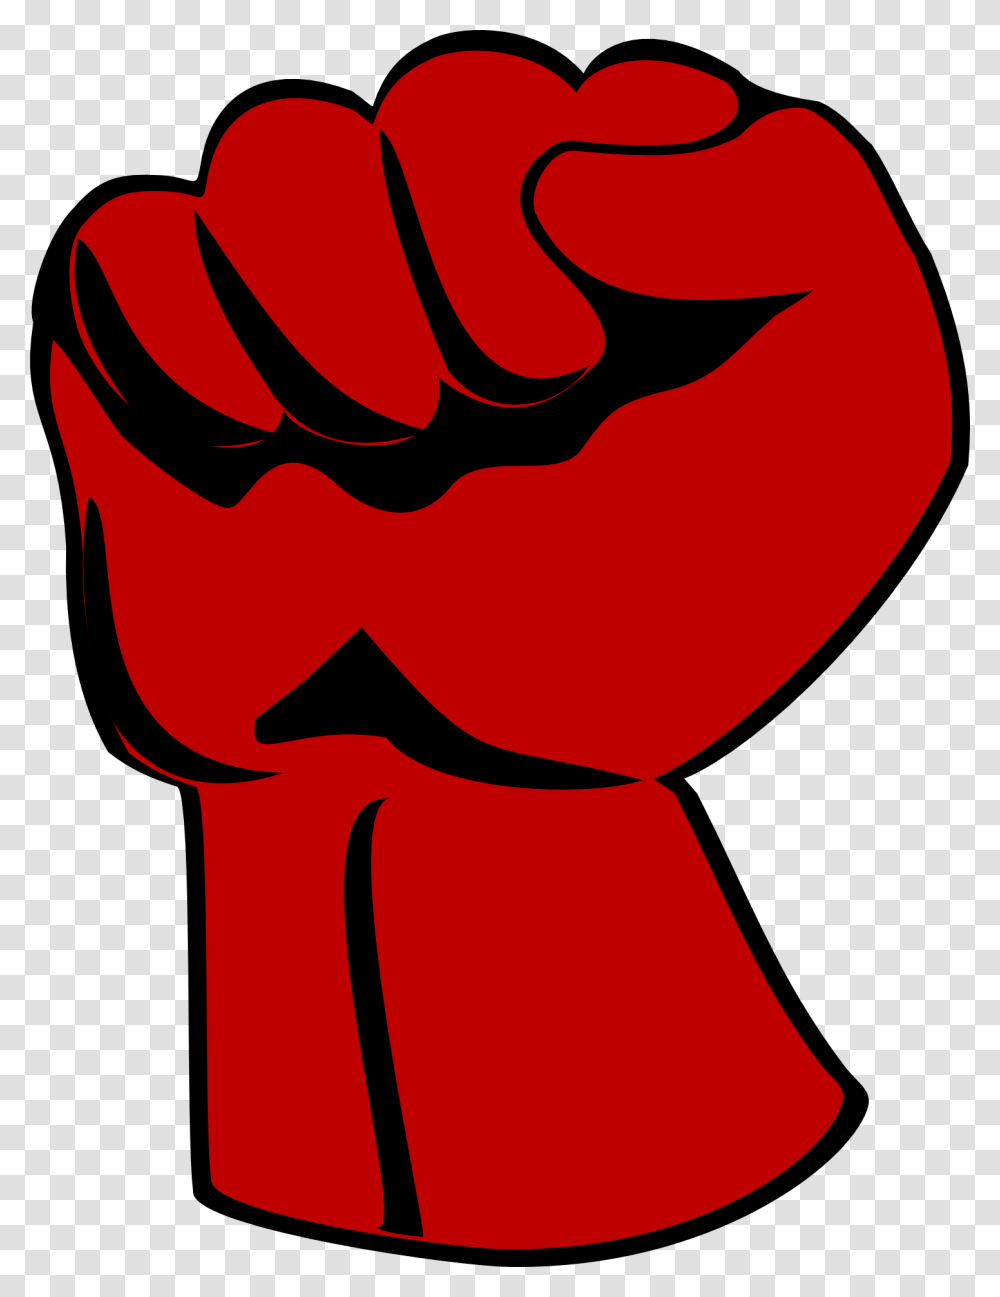 Fist Angry Russian Free Vector Graphic On Pixabay Red Fist Logo, Hand, Heart Transparent Png